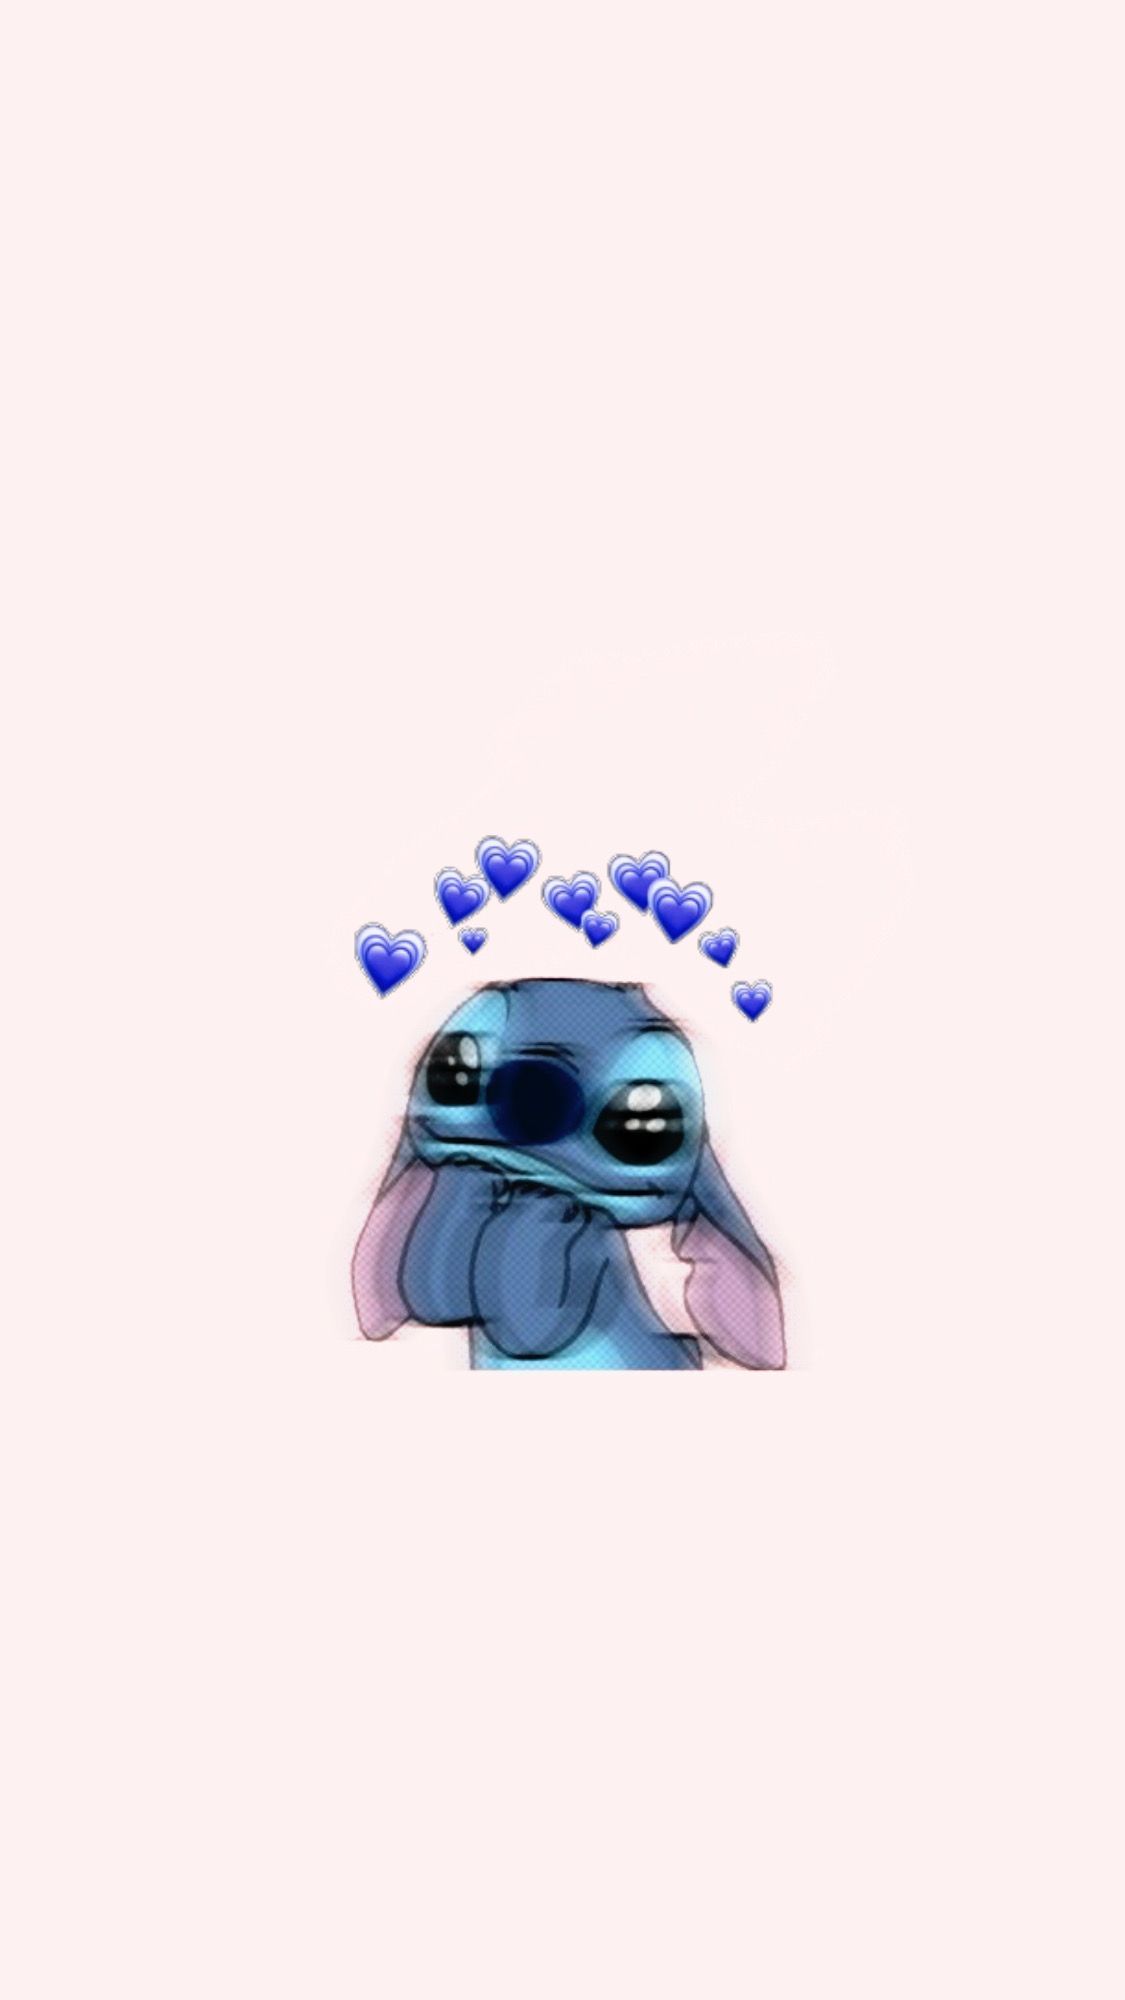 Stitch Aesthetic Wallpaper Free Stitch Aesthetic Background